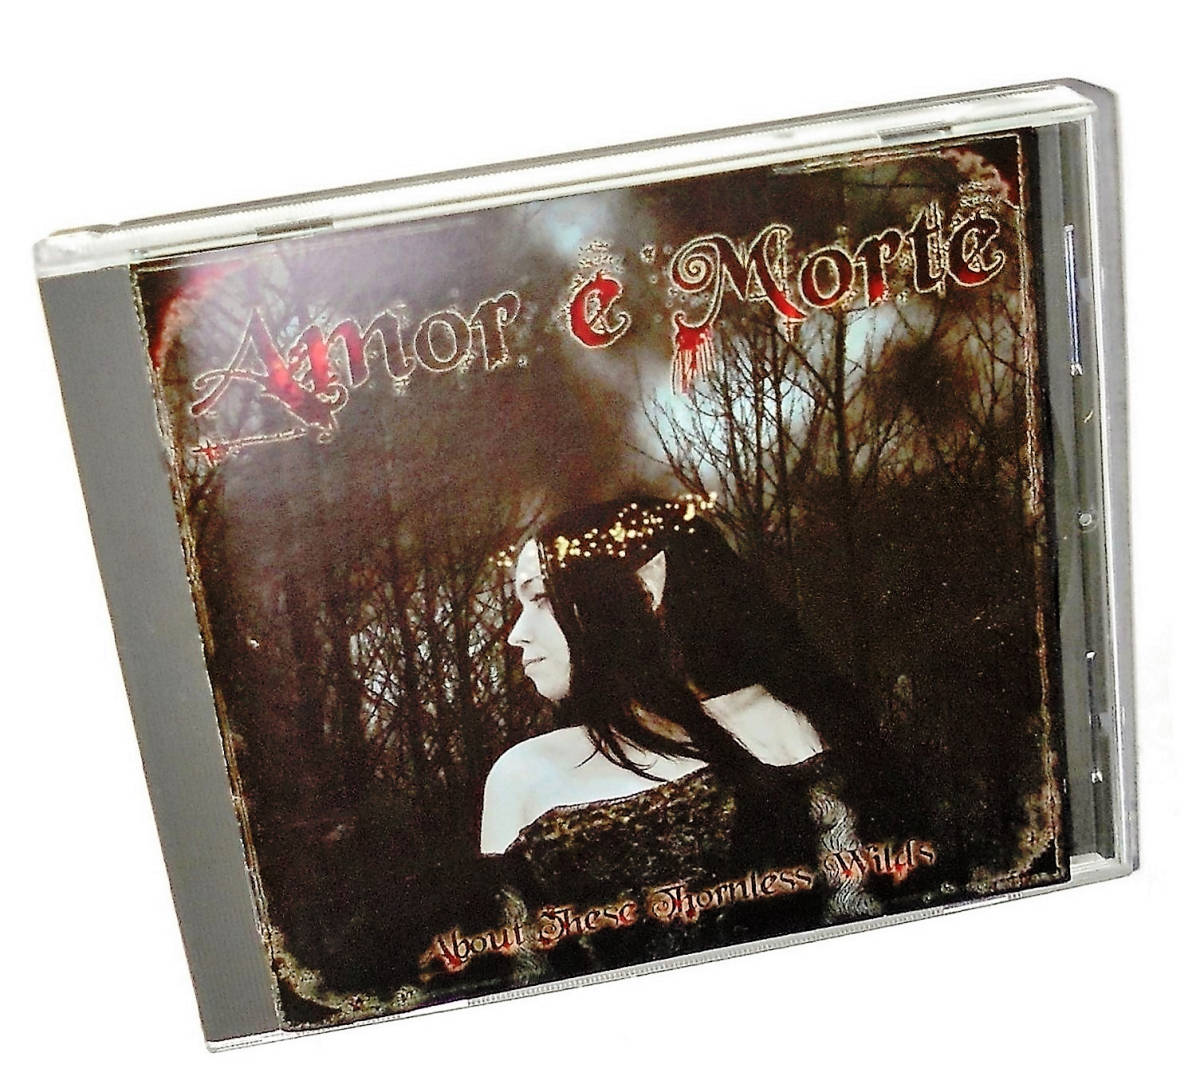 Death Metal Cradle Of Filth Ulver Therion Styleゴシックシンフォニック ブラック デス/メタルAMOR E MORTE About These Thornless Wilds_画像1